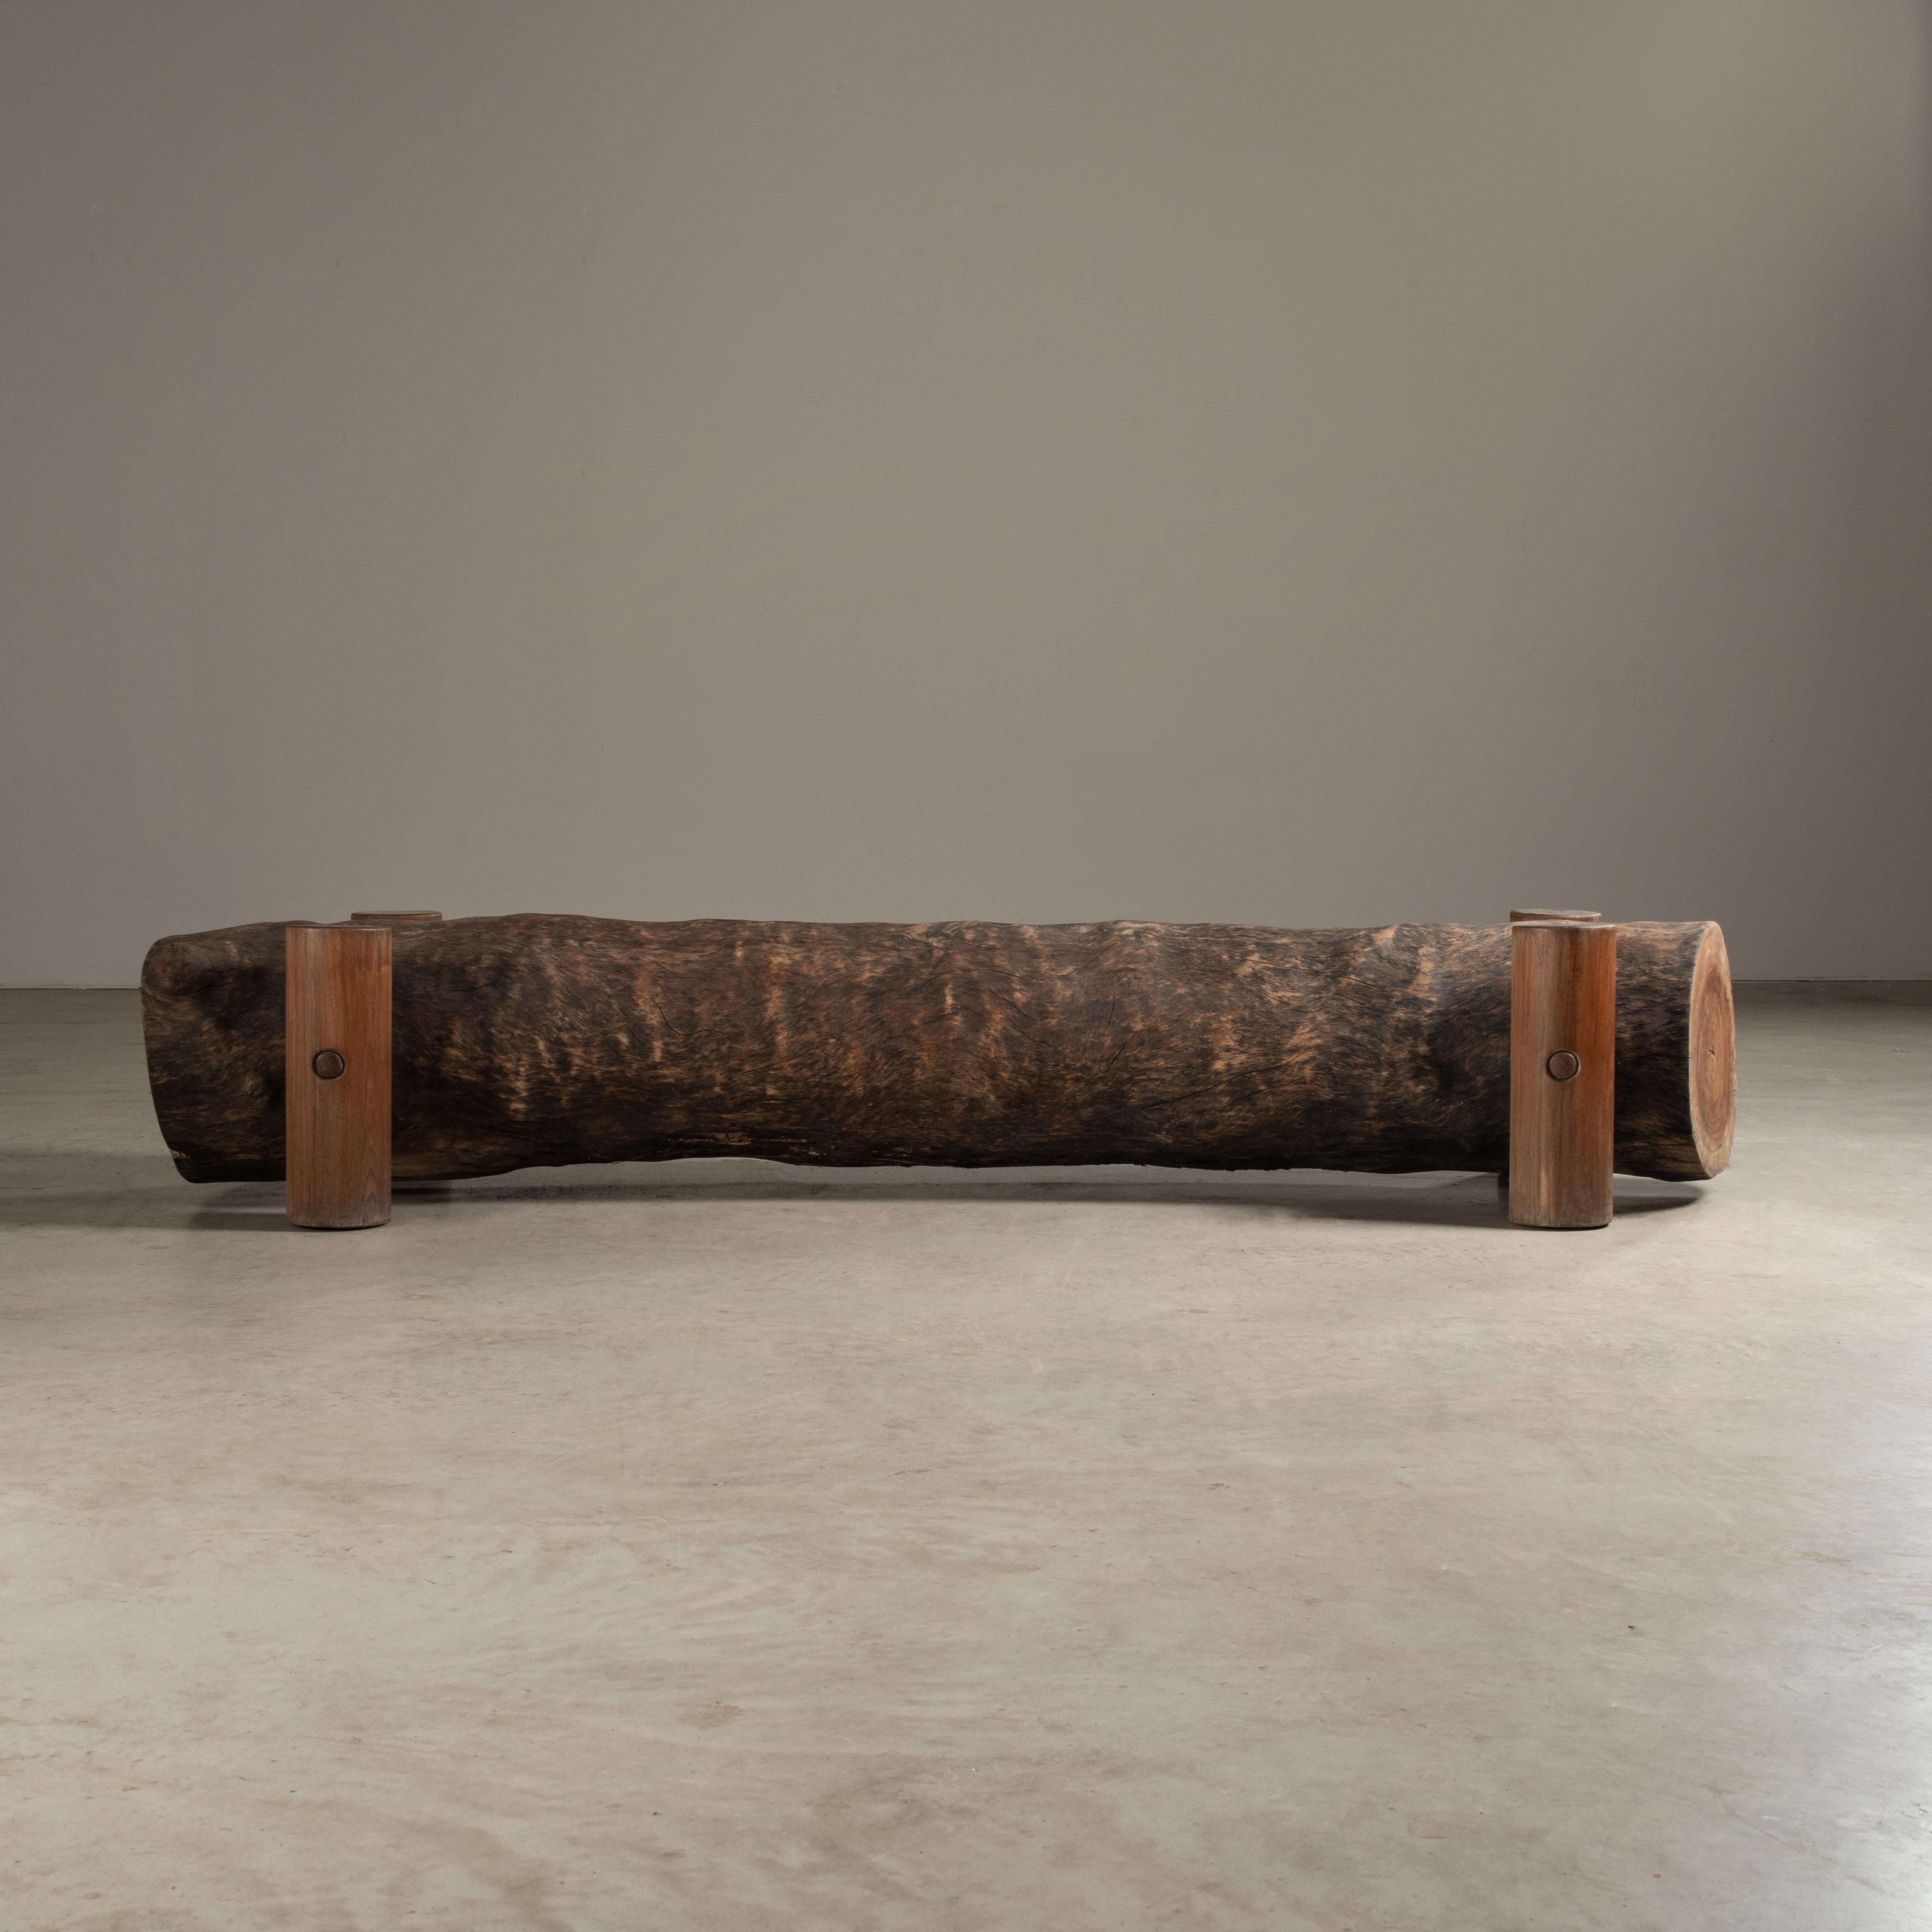 The Tora bench, designed by Zanini, is a fine example of contemporary design that celebrates the inherent beauty and form of natural materials. The bench is distinguished by its organic and robust appearance, which is achieved through the use of a